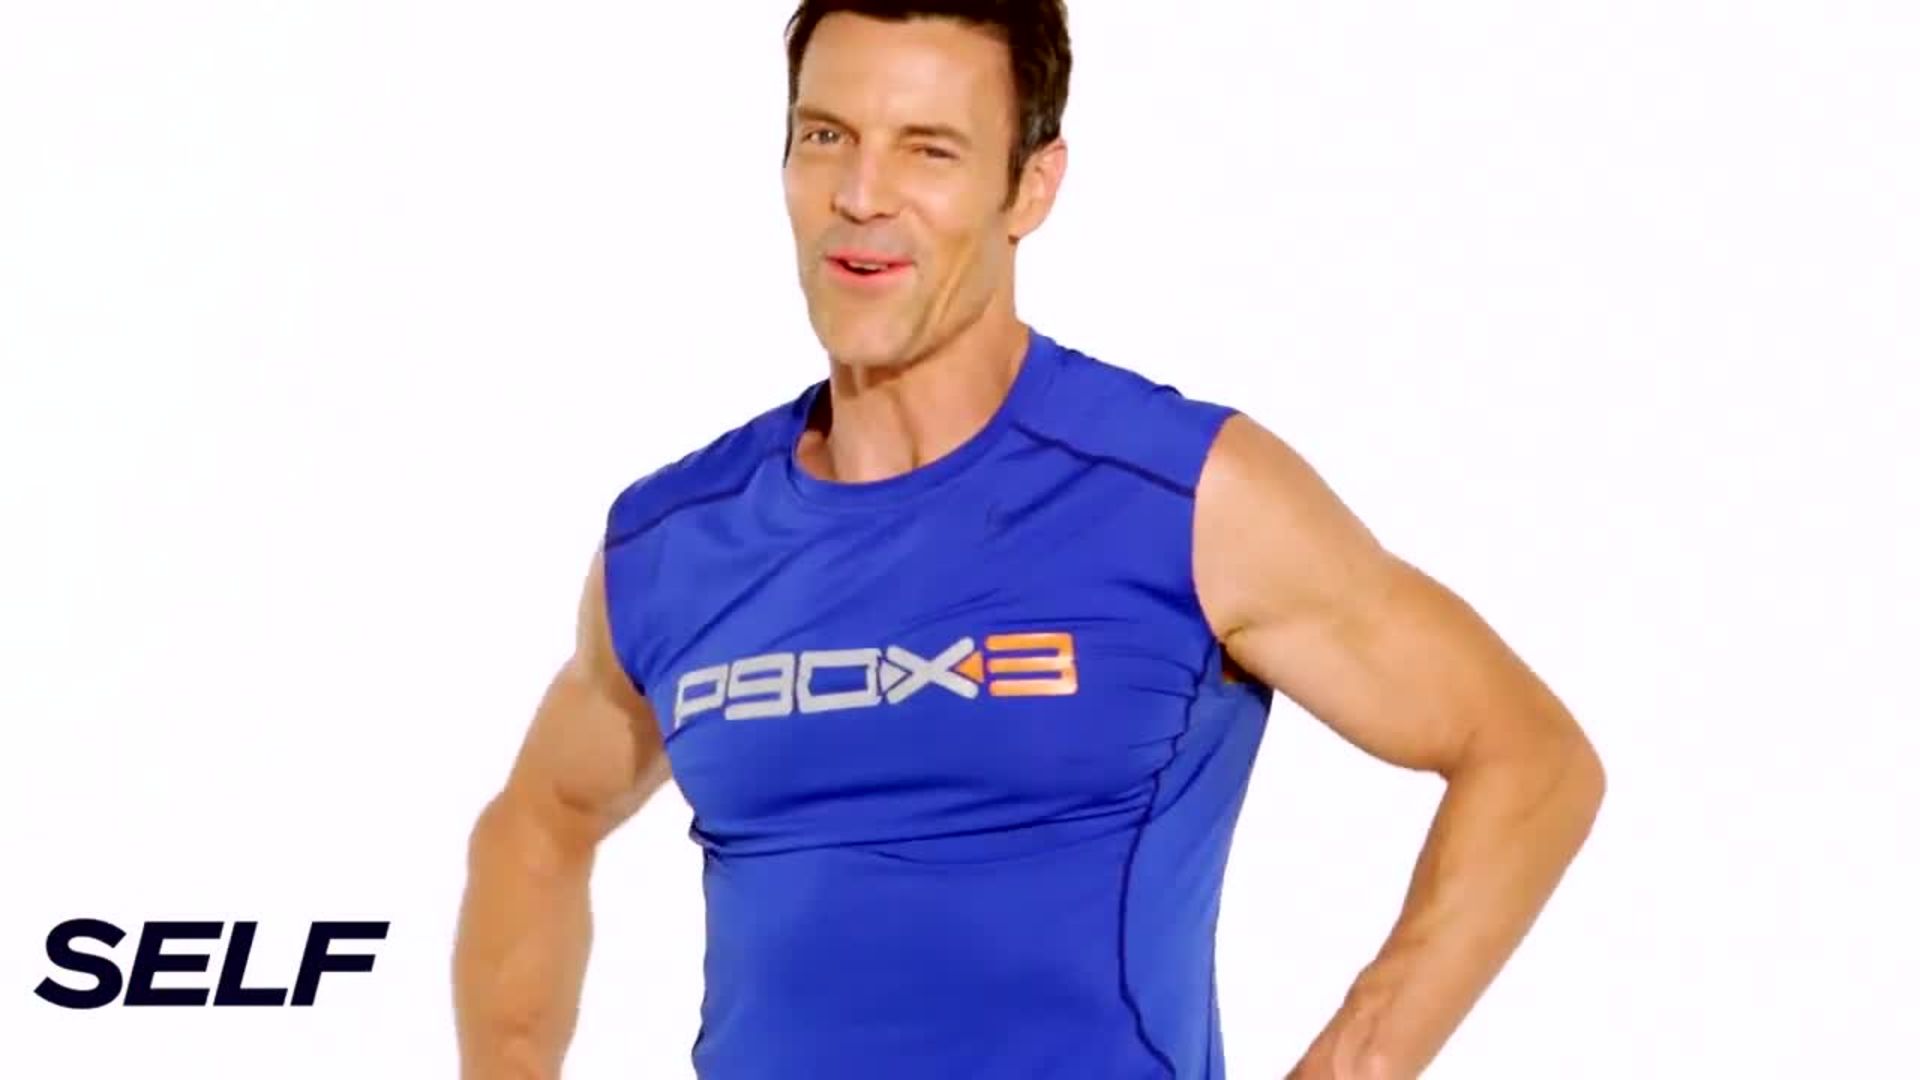 Watch See The P90x Moves Thatll Build You A New Body Self Video